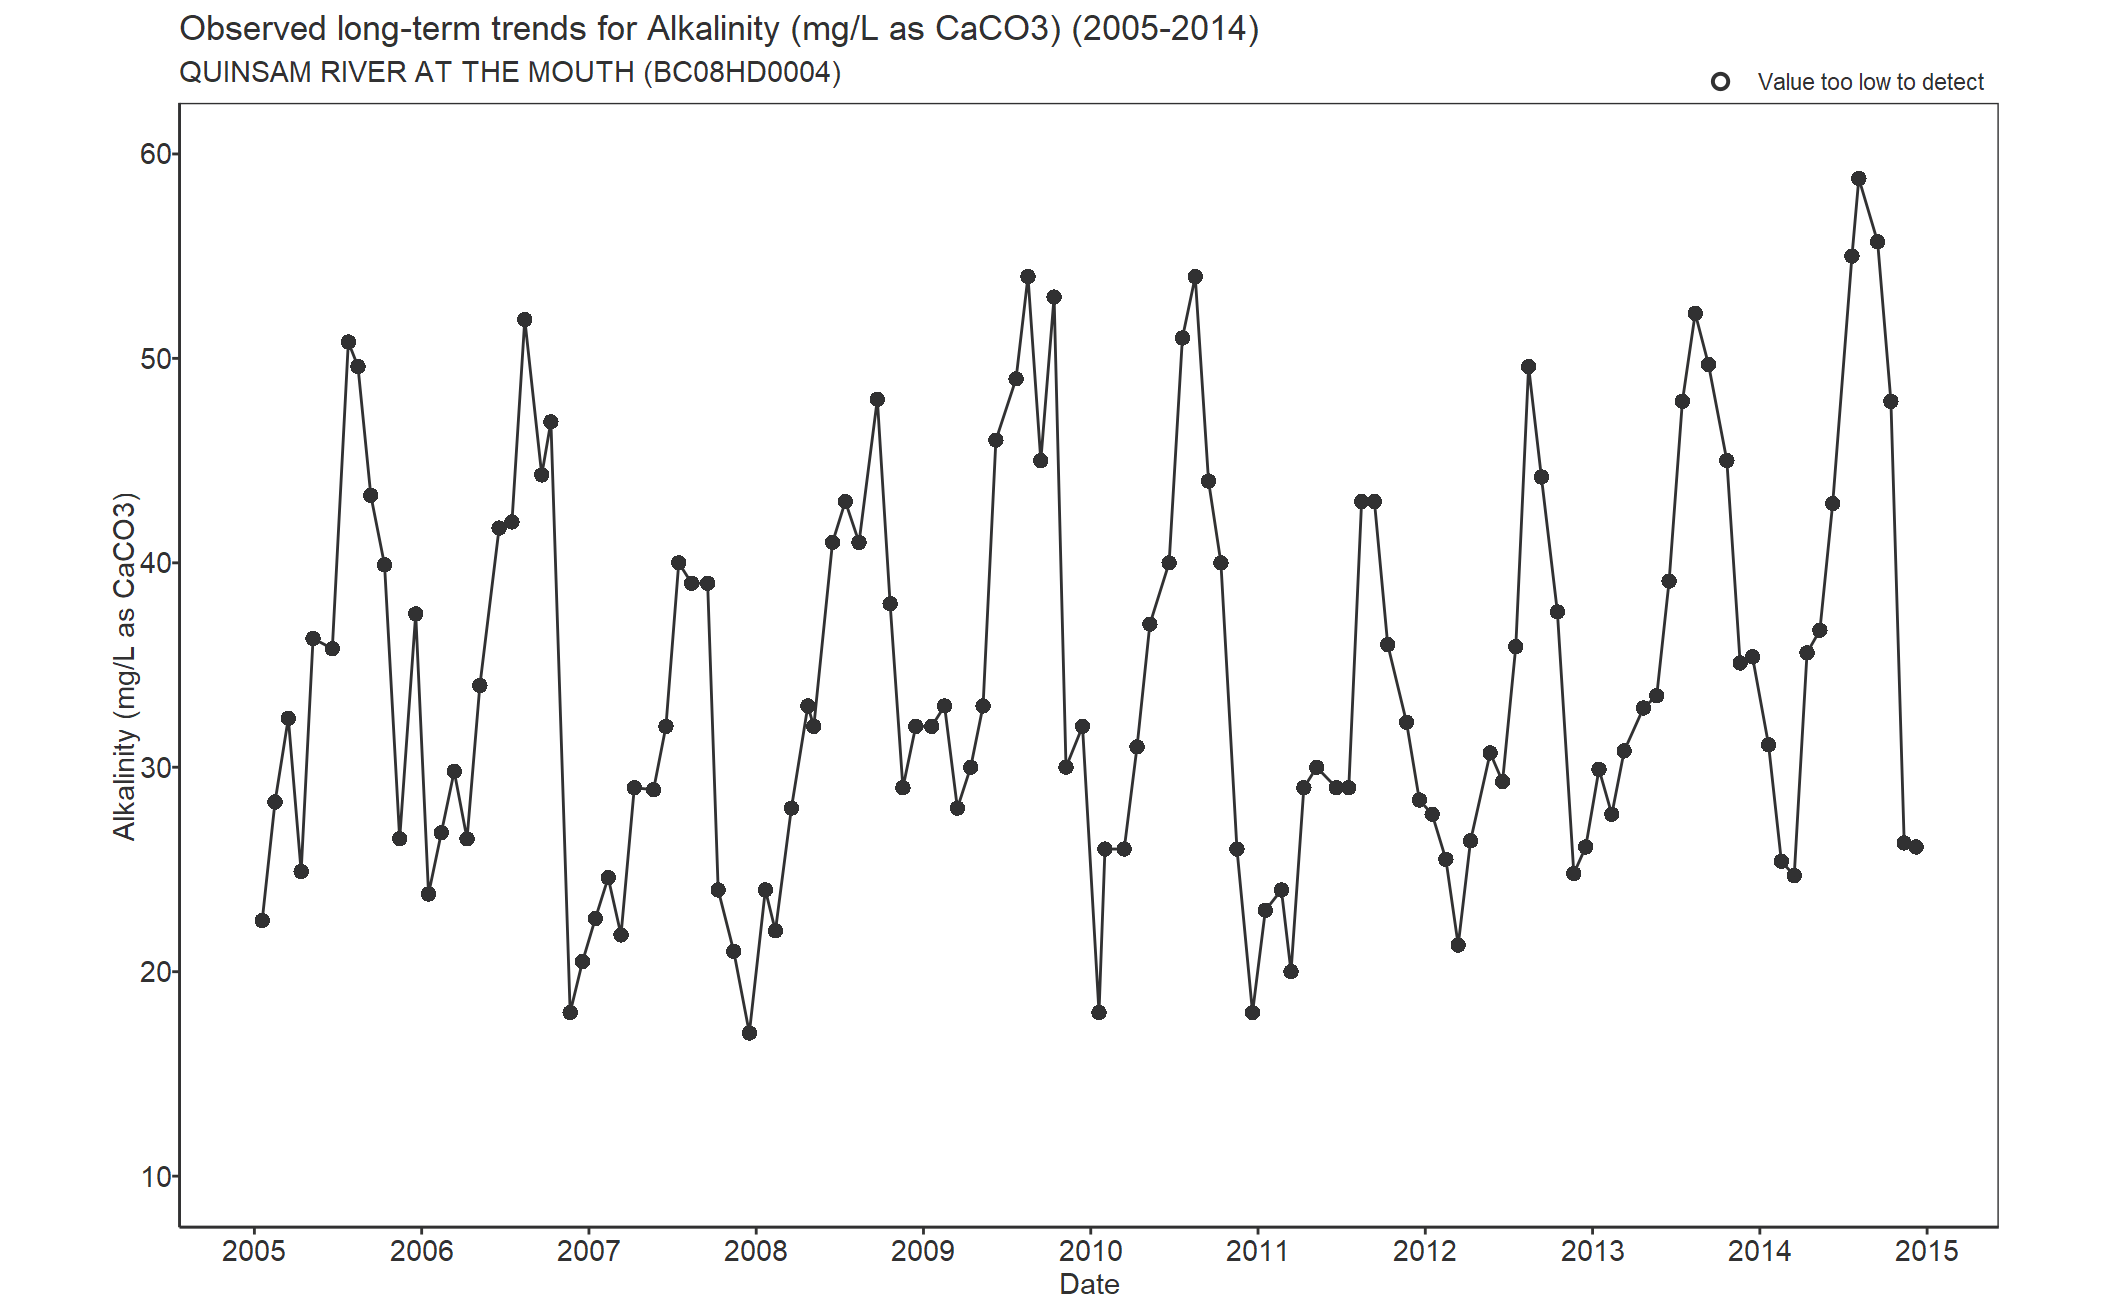 Observed long-term trends for Alkalinity (2005-2014)